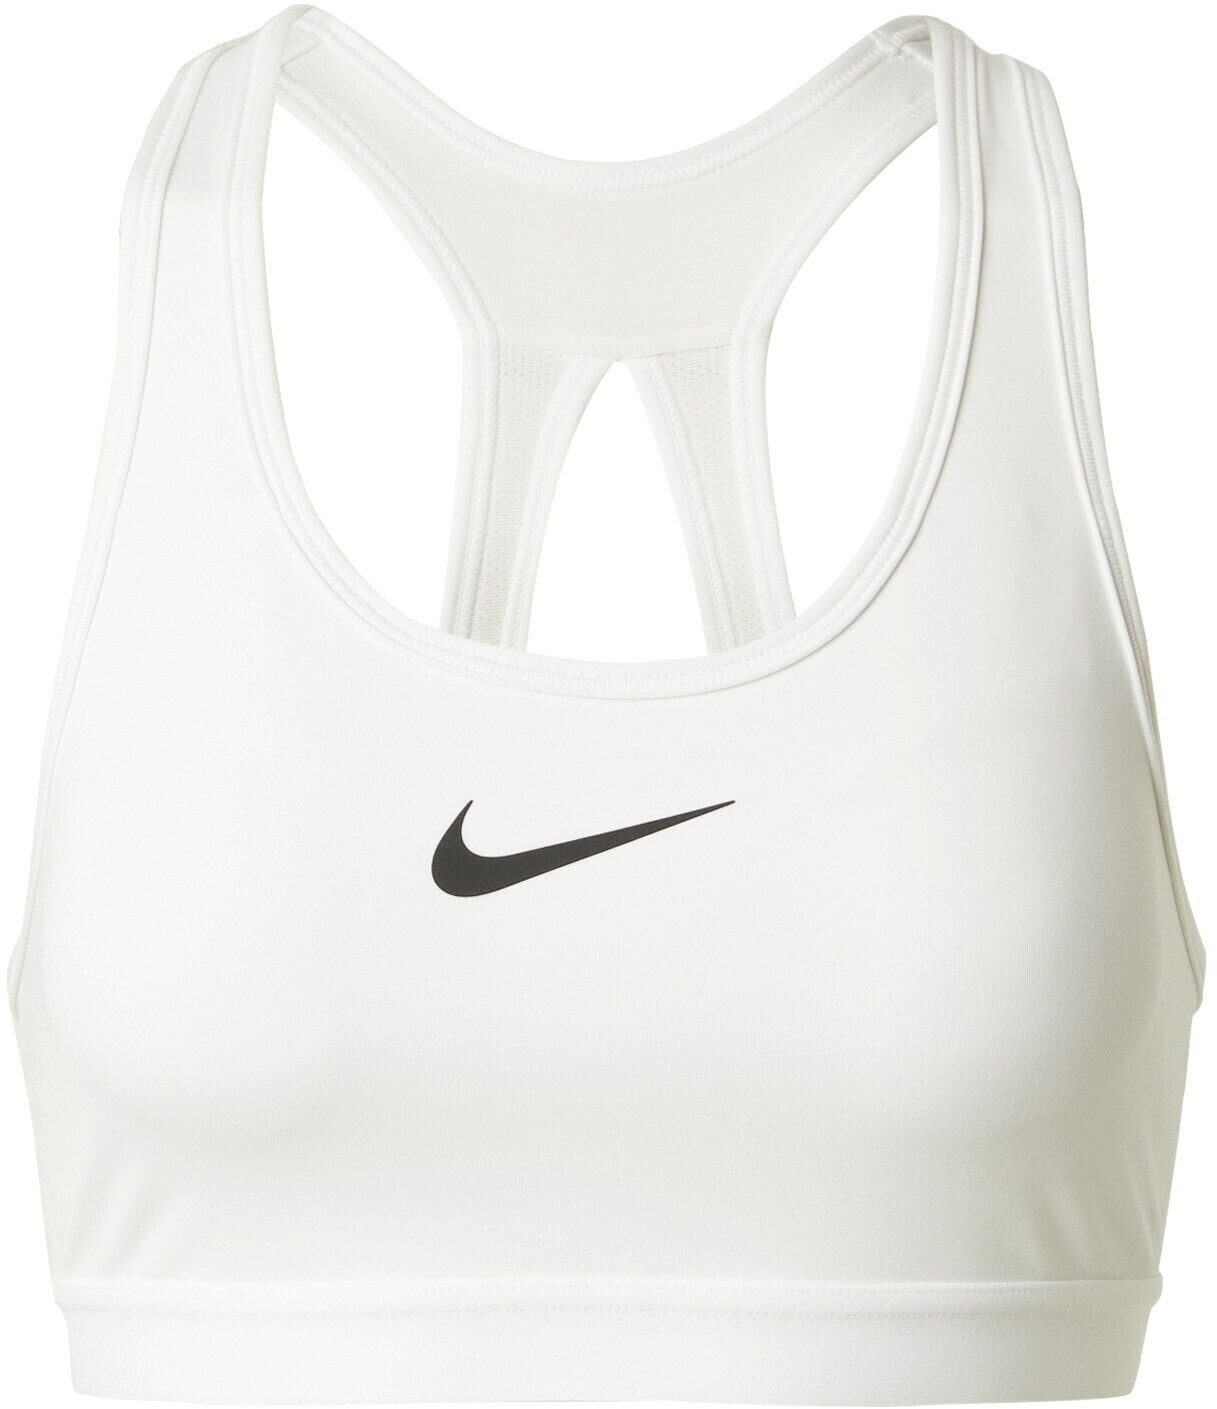 Buy Nike Swoosh High Support Women's Non-Padded Adjustable Sports